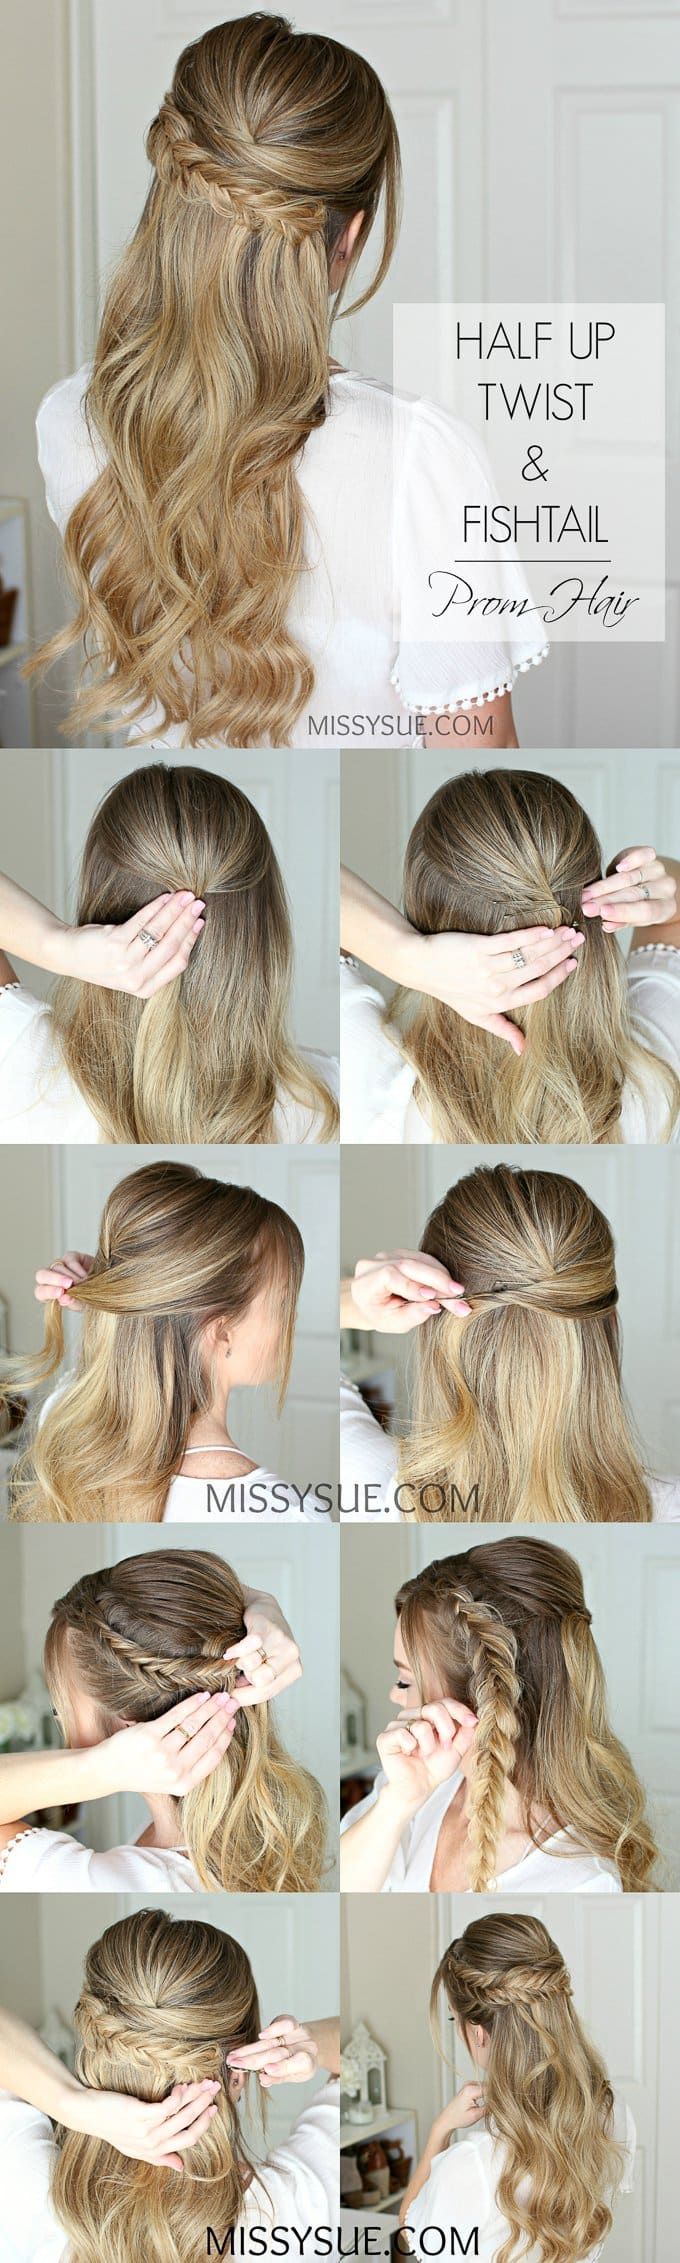 10 Elegant Hairstyles Tutorials That You Will Adore This Summer - ALL ...